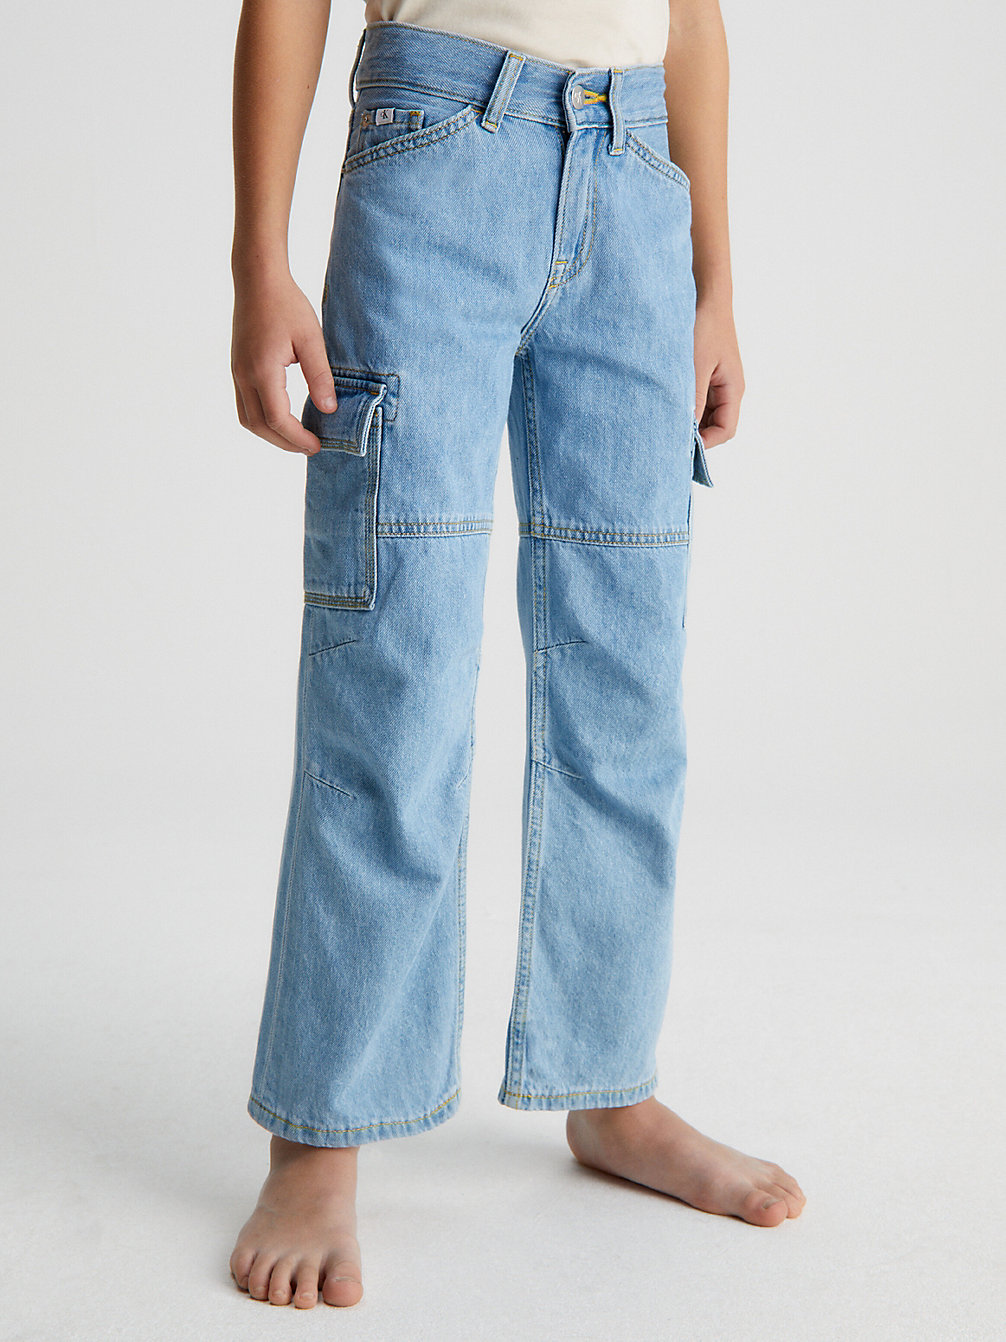 UTILITY WASHED BLUE > Jeansy Relaxed Skater > undefined boys - Calvin Klein